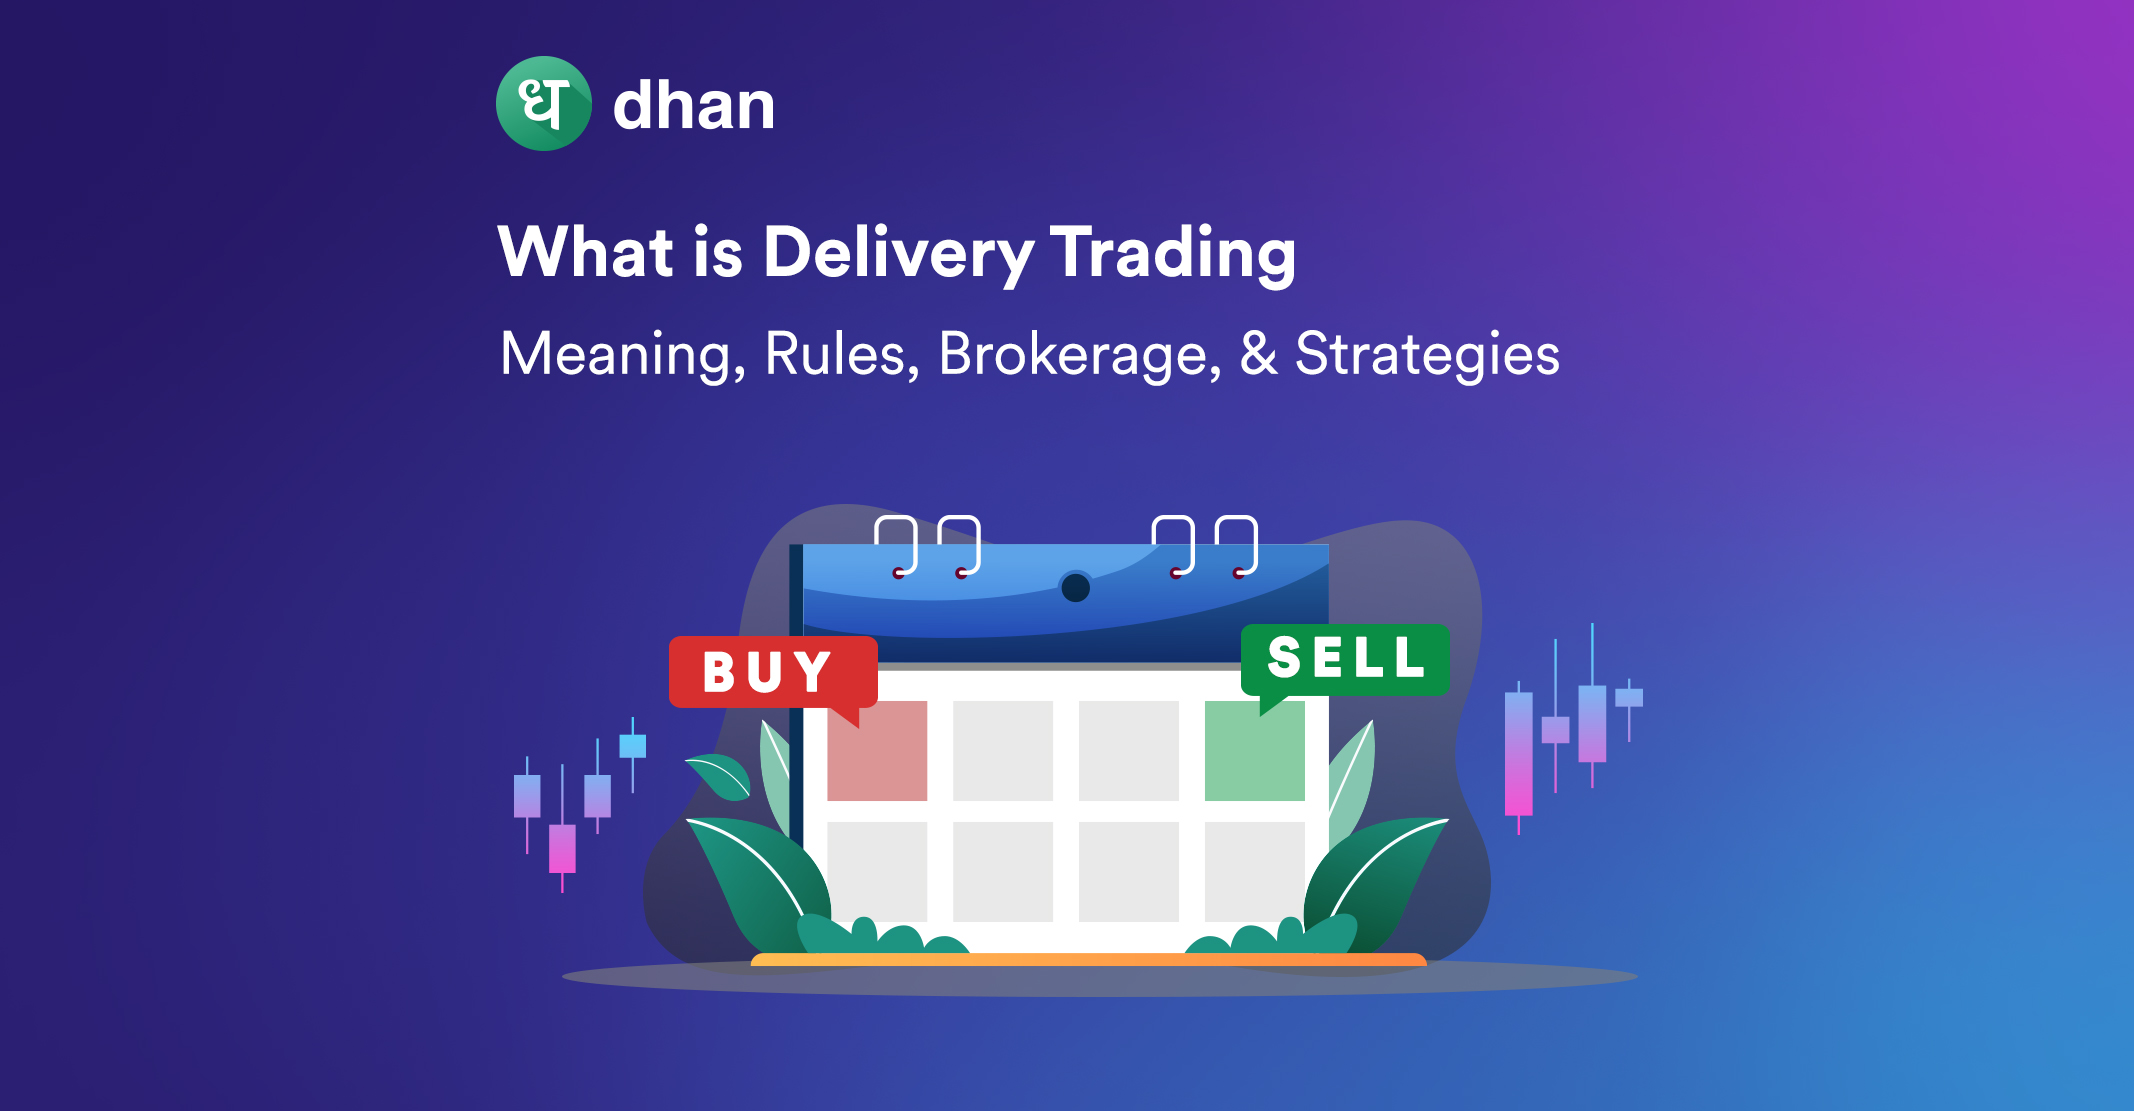 This image is a banner for "What is Delivery Trading".